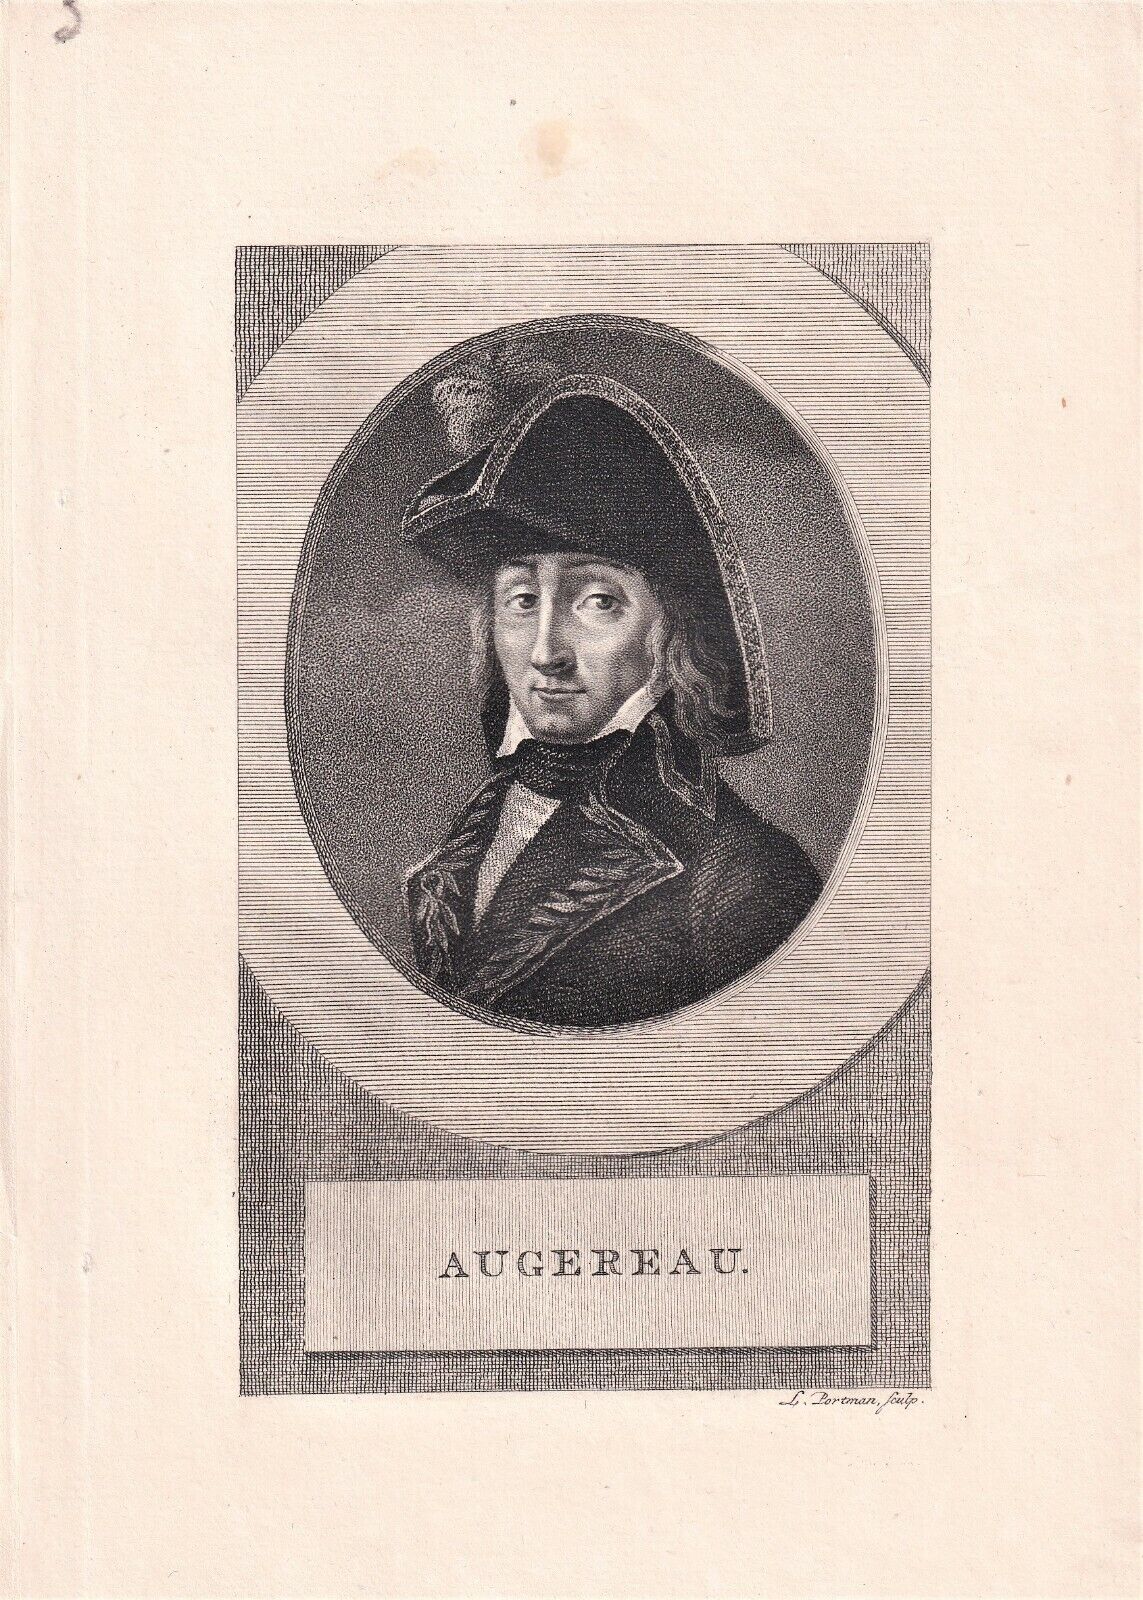 PIERRE AUGEREAU Marshal of France lithograph by Ludwig Portman, 1807